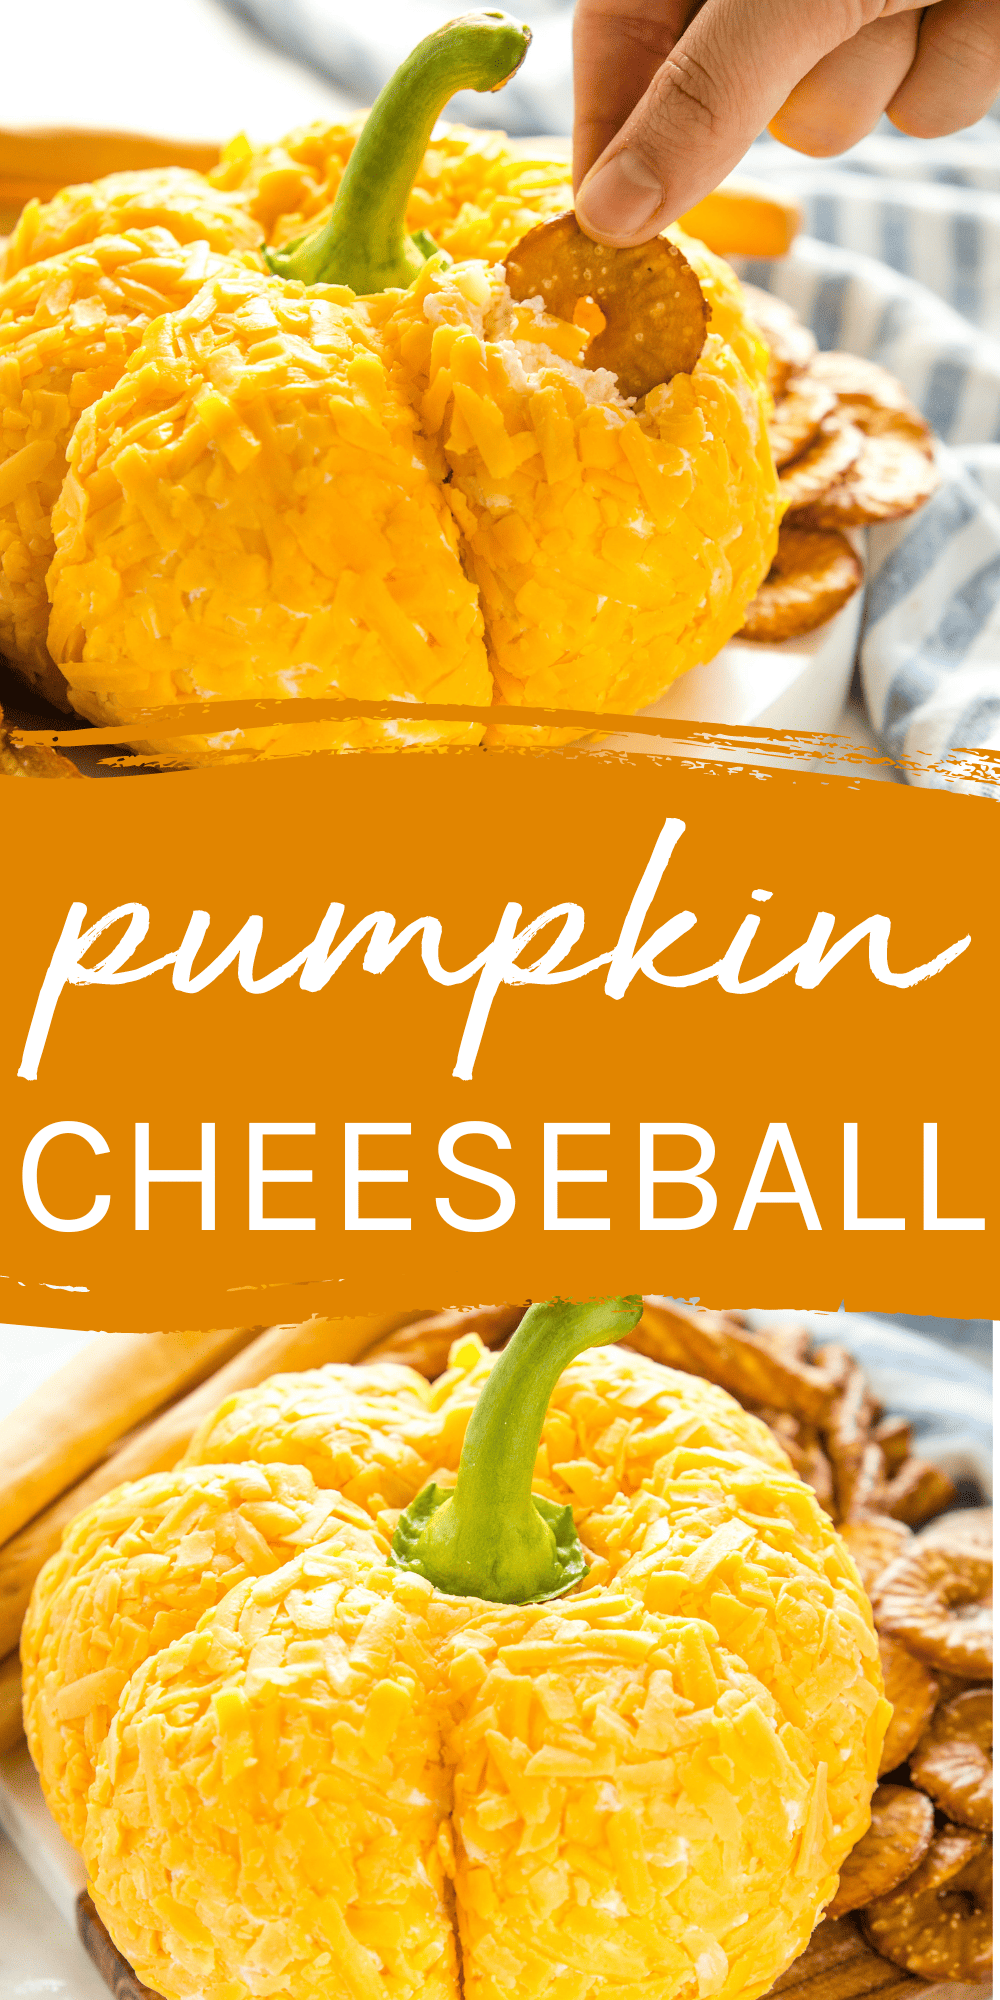 This Pumpkin Cheese Ball recipe is the best easy party appetizer for fall! A basic cheese ball mixture shaped like a pumpkin and coated with cheddar cheese - the perfect snack for Halloween or Thanksgiving! Recipe from thebusybaker.ca! #cheeseball #pumpkincheeseball #thanksgiving #halloween #halloweenpartyrecipe #thanksgivingappetizer #appetizer #snackrecipe #appetizerrecipe #easycheeseball #easyappetizer #pumpkinshapedcheeseball via @busybakerblog